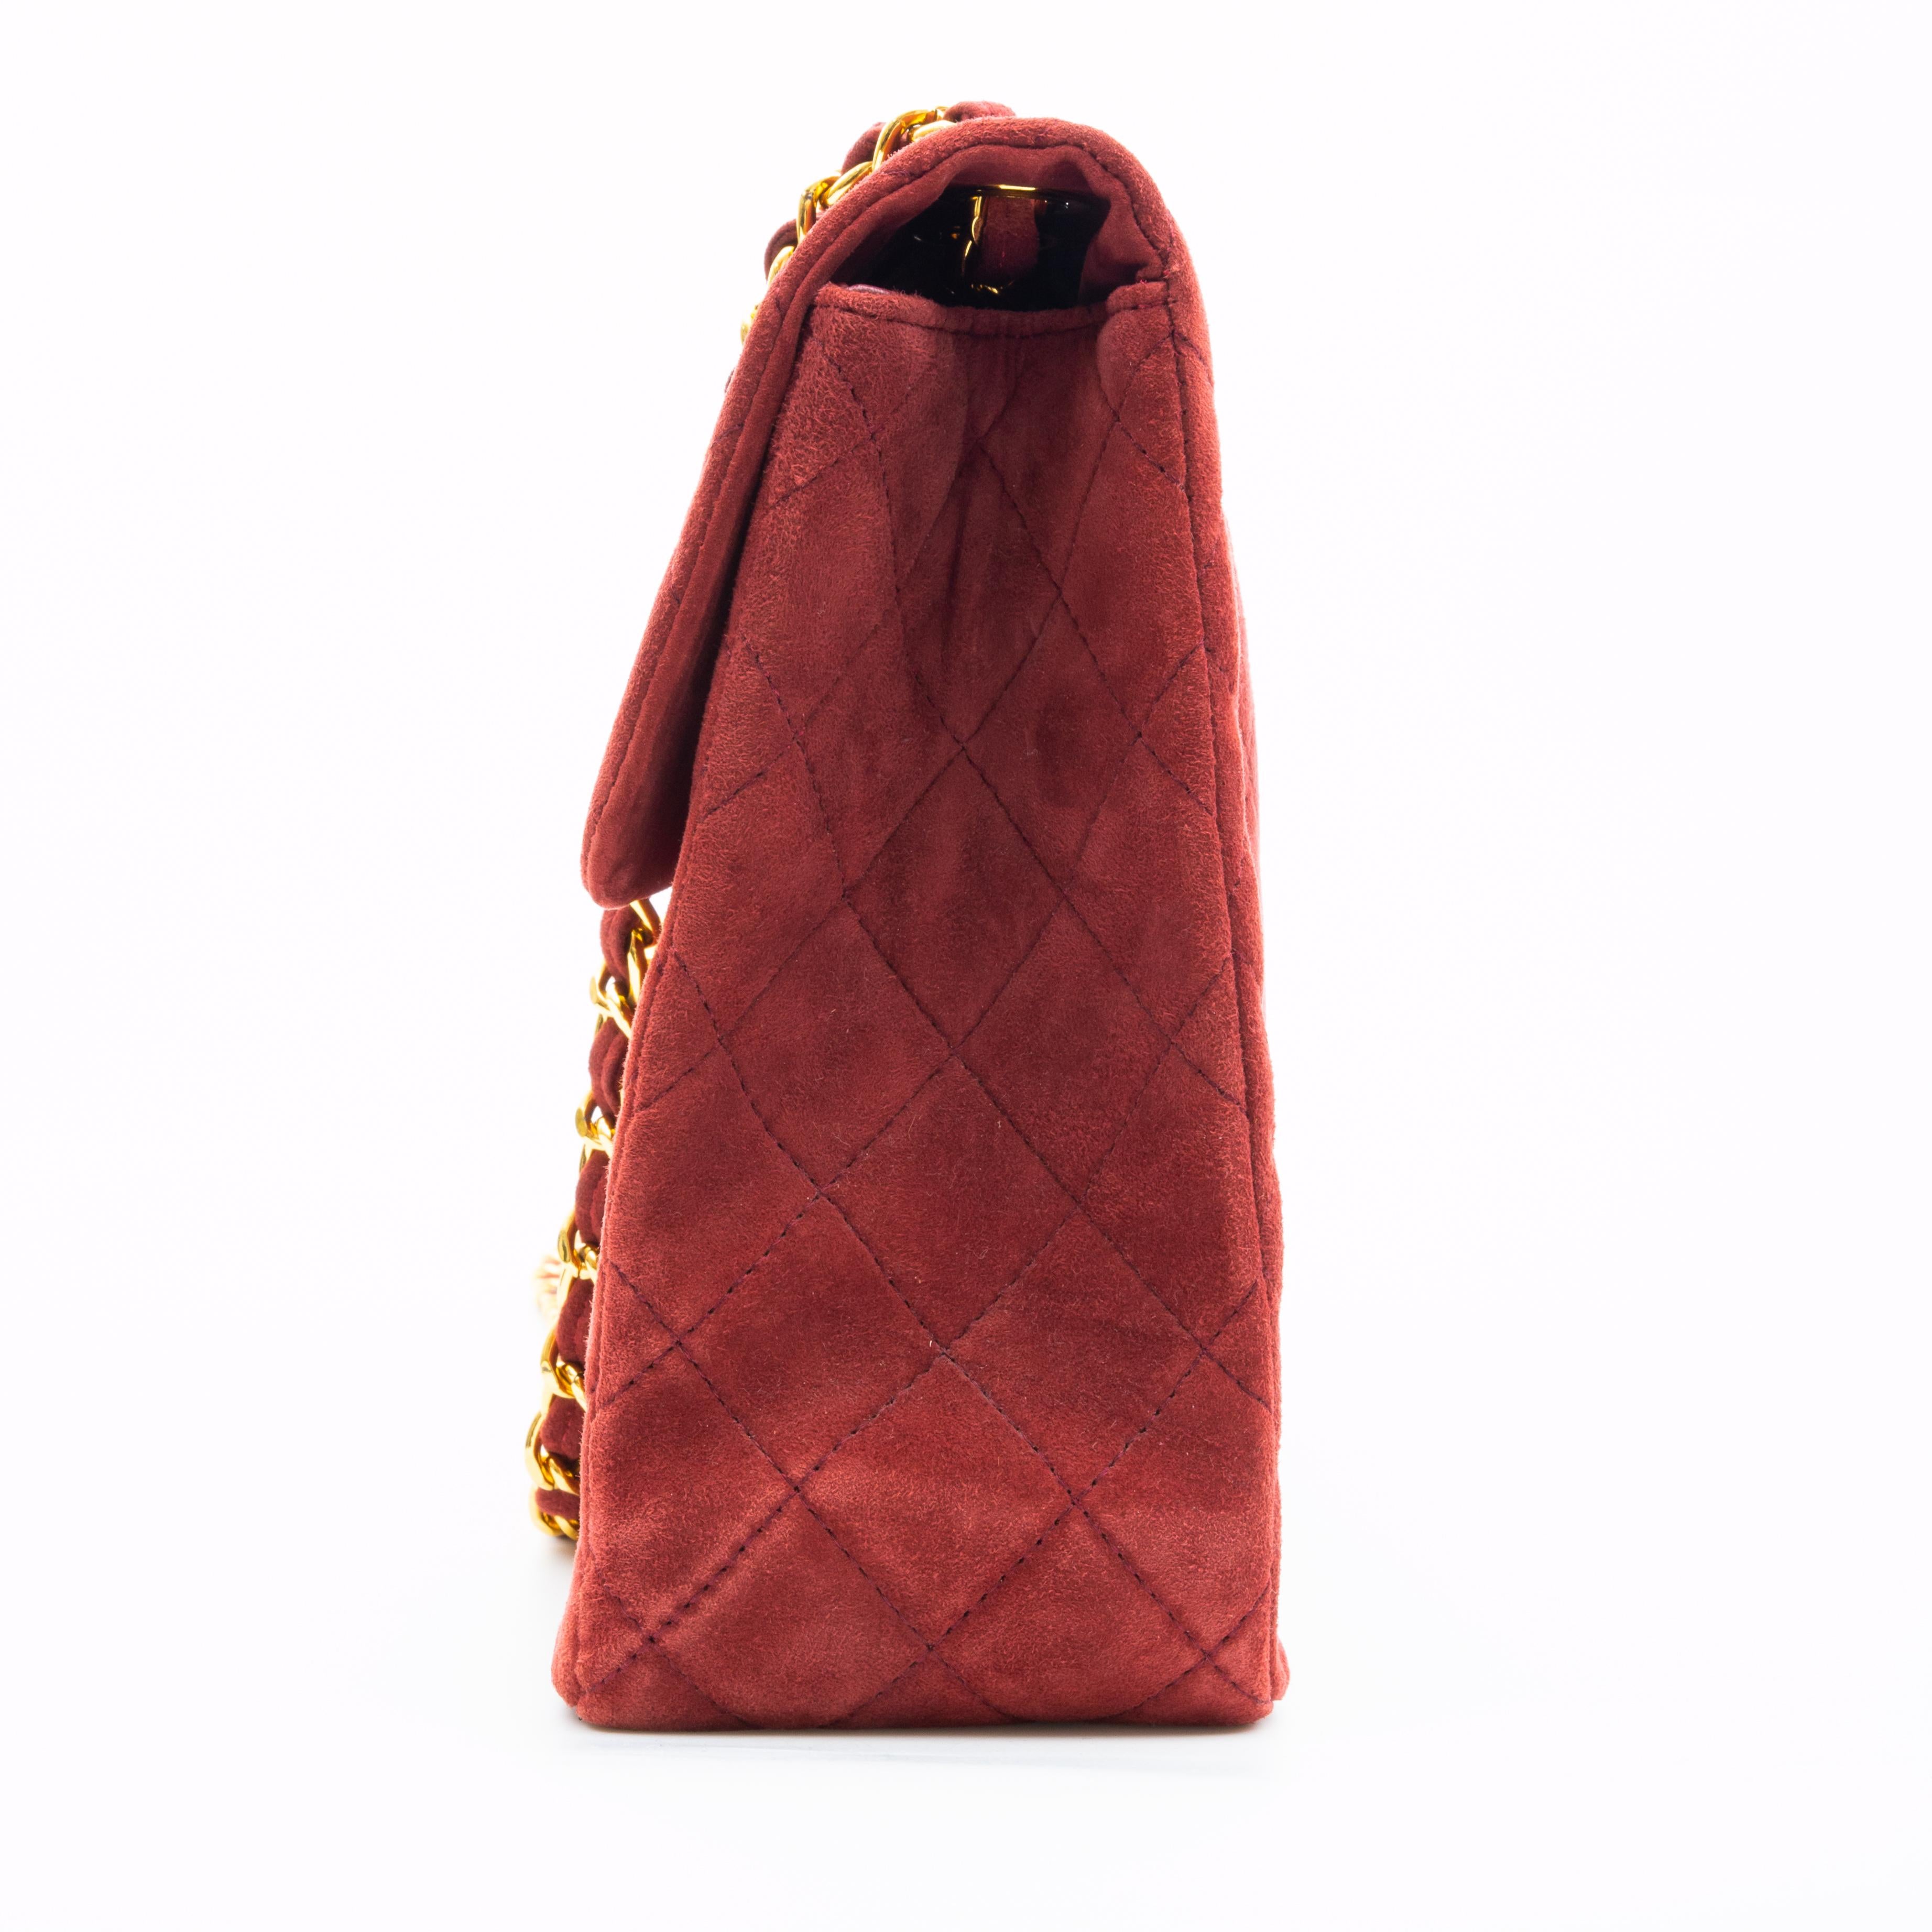 Women's or Men's Chanel Classic Quilted Burgundy Suede Jumbo Single Flap Bag